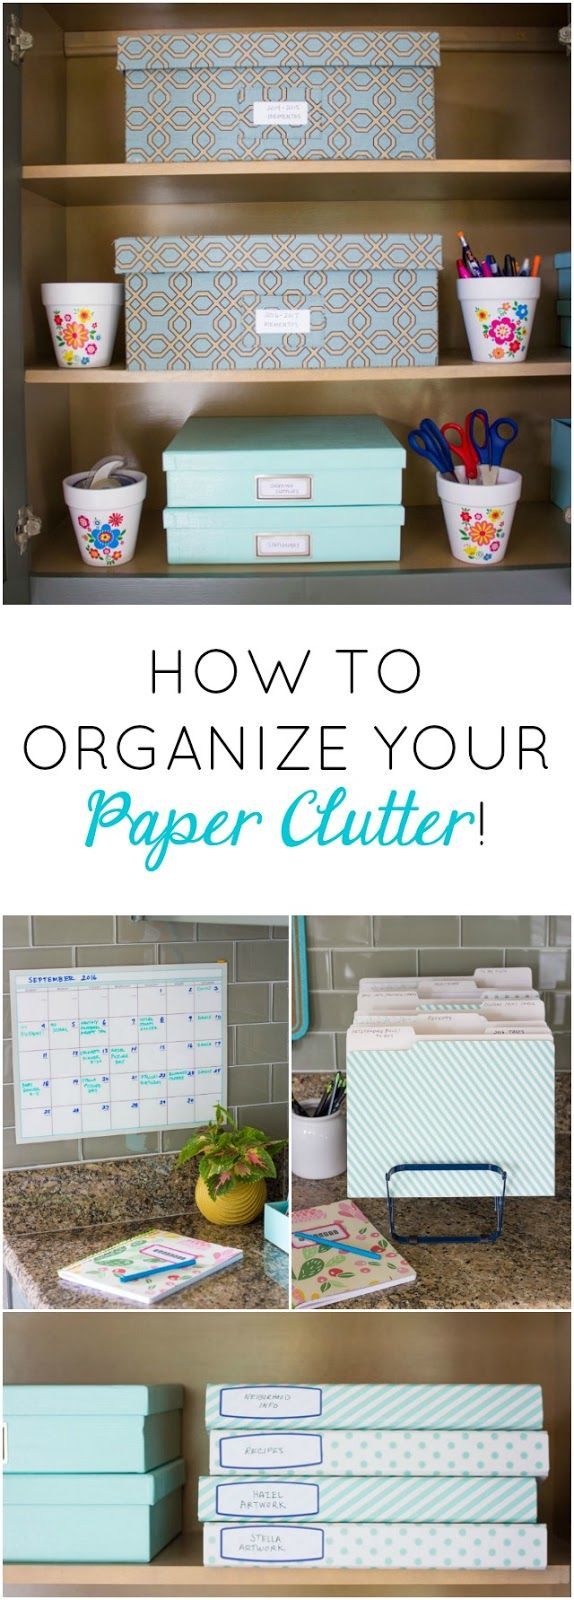 7 Simple Steps to Organizing Your Paper Clutter! -   25 diy paper organization
 ideas